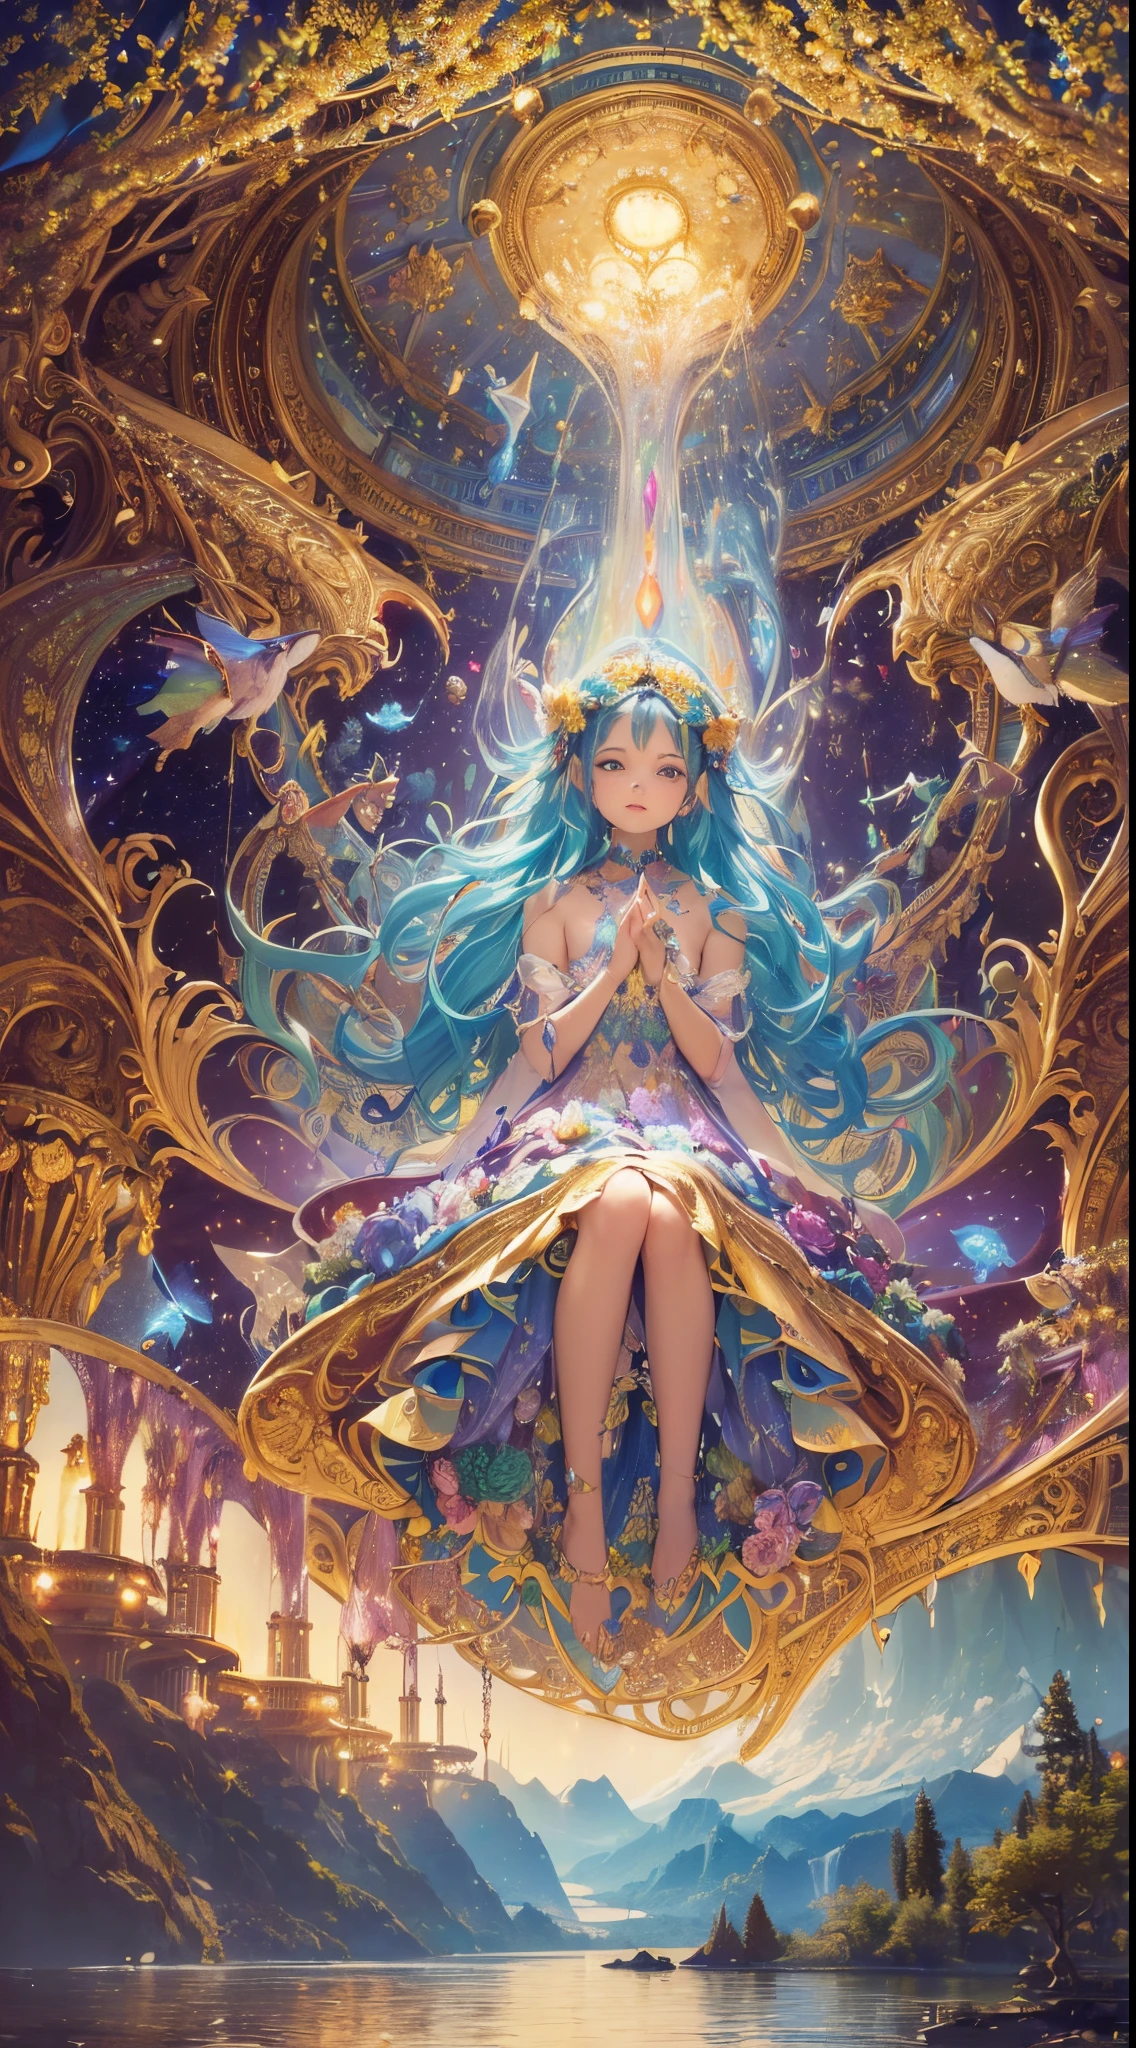 (high quality:1.4), (best quality:1.4), (masterpiece:1.4), official art, official wallpaper, surreal, beautifulgoddess, (1woman:1.1), (long wavy hair:1.1), (flower crown:1.1), (mystical creatures:1.1), (floating islands:1.1), (detailed landscape:1.1), (magic in the air:1.1), (stardust:1.1), night sky, (whimsical atmosphere:1.1), (dreamlike world:1.1), (bubbles:1.1), flying books, (luna moths:1.1), (moonlight:1.1), enchanted forest, (wisdom:1.1), (powerful energy:1.1), (guardian angels:1.1), (peaceful:1.1), vibrant colors, (detailed:1.05), (extremely detailed:1.06), sharp focus, (intricate:1.03), cinematic lighting, (extremely intricate:1.04), (epic scenery:1.09), vibrant colors, (beautiful scenery:1.08), (detailed scenery:1.08), (intricate scenery:1.07), (wonderful scenery:1.05),, (sharp focus,absurdres,high quality,masterpiece,highres,best quality:1.5)